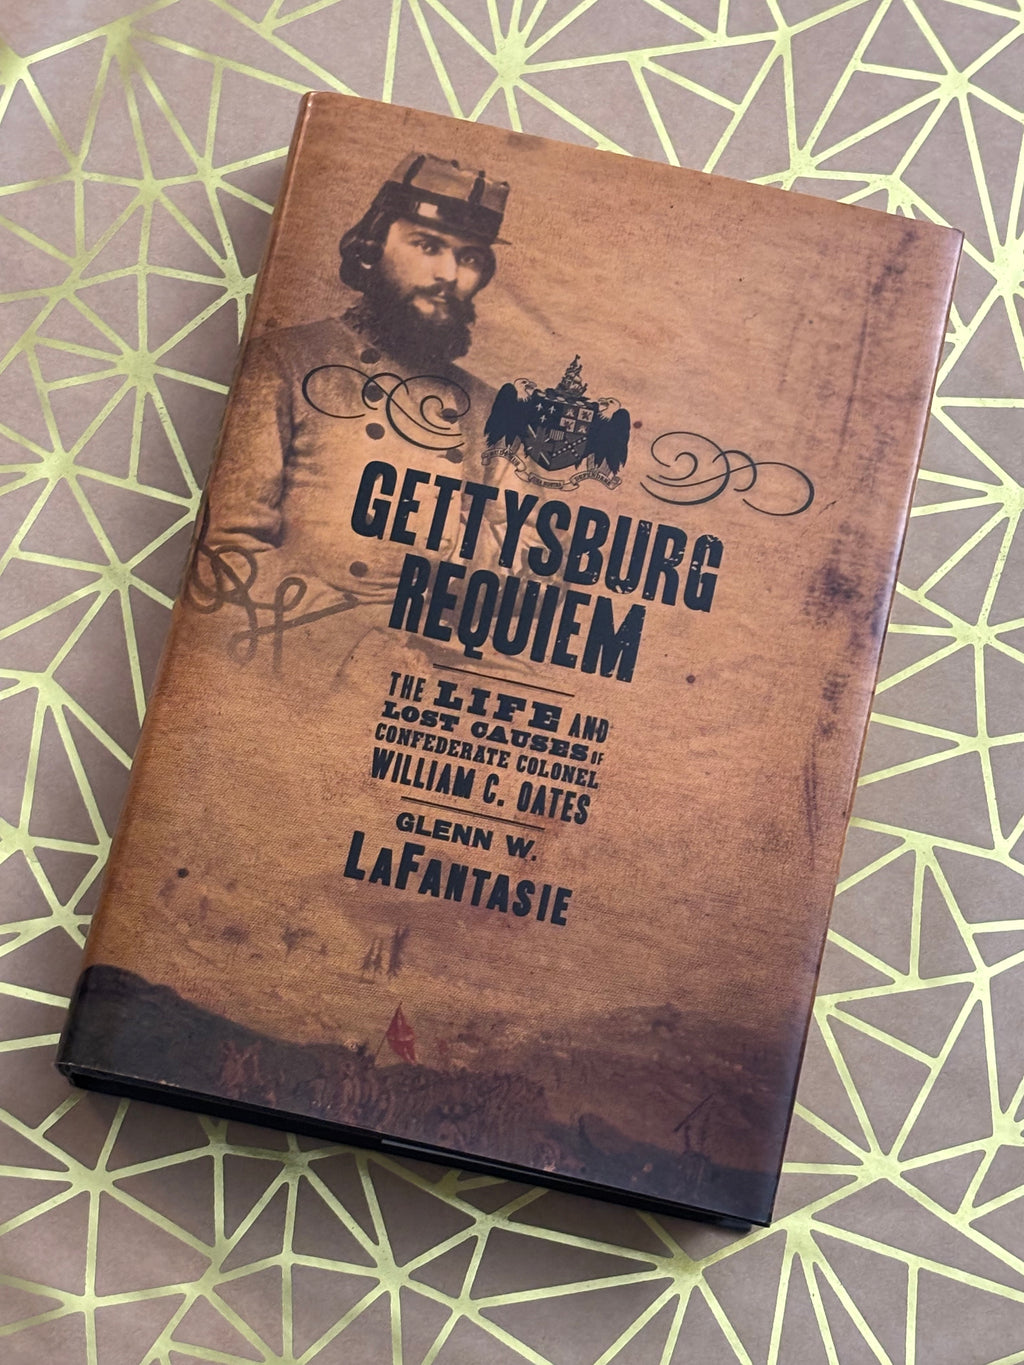 Gettysburg Requiem: The Life and Lost Causes of Confederate Colonel William C. Oates- By Glenn W. LaFantasie